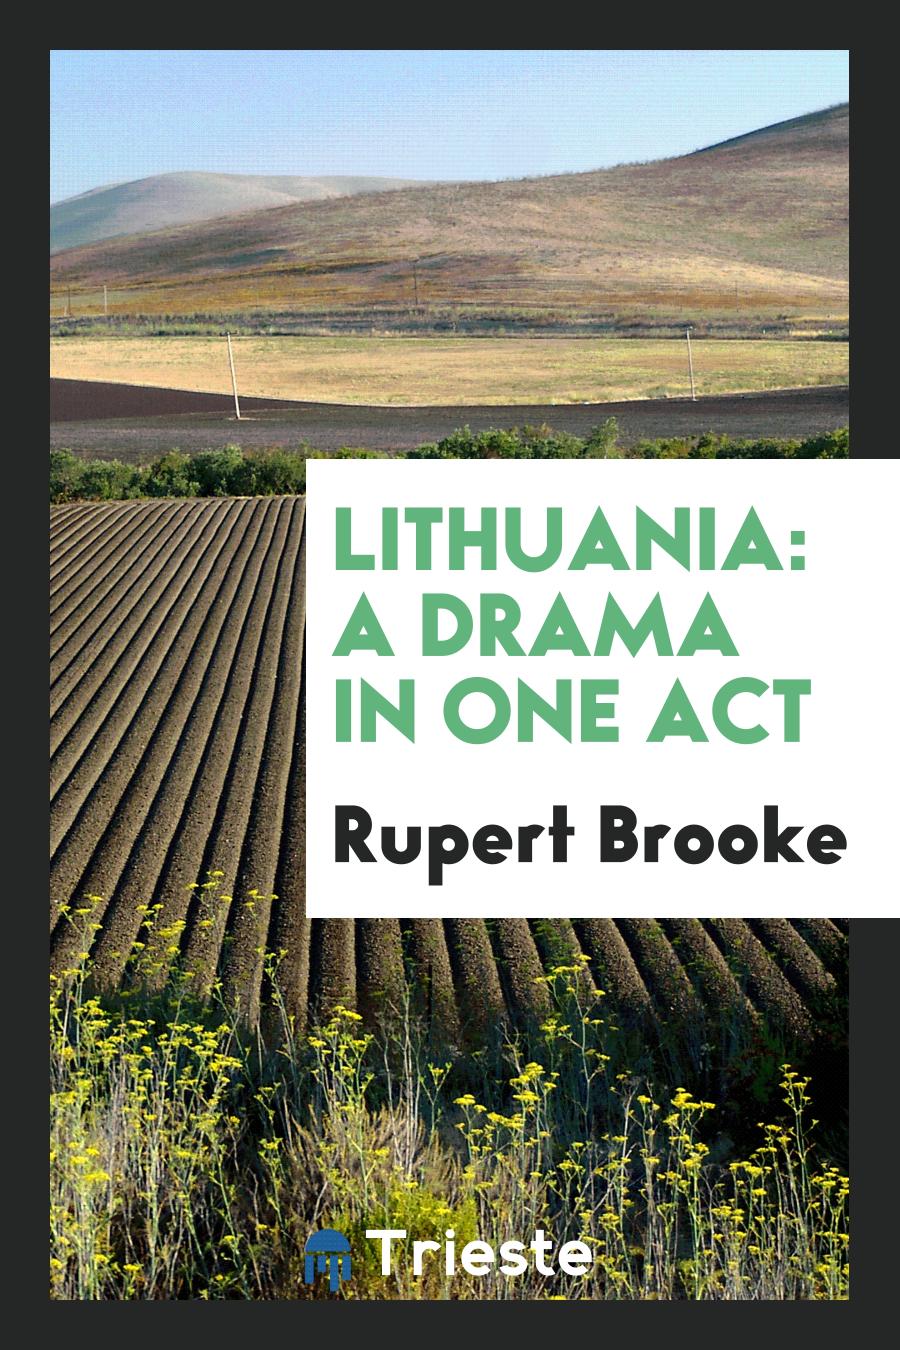 Lithuania: A Drama in One Act